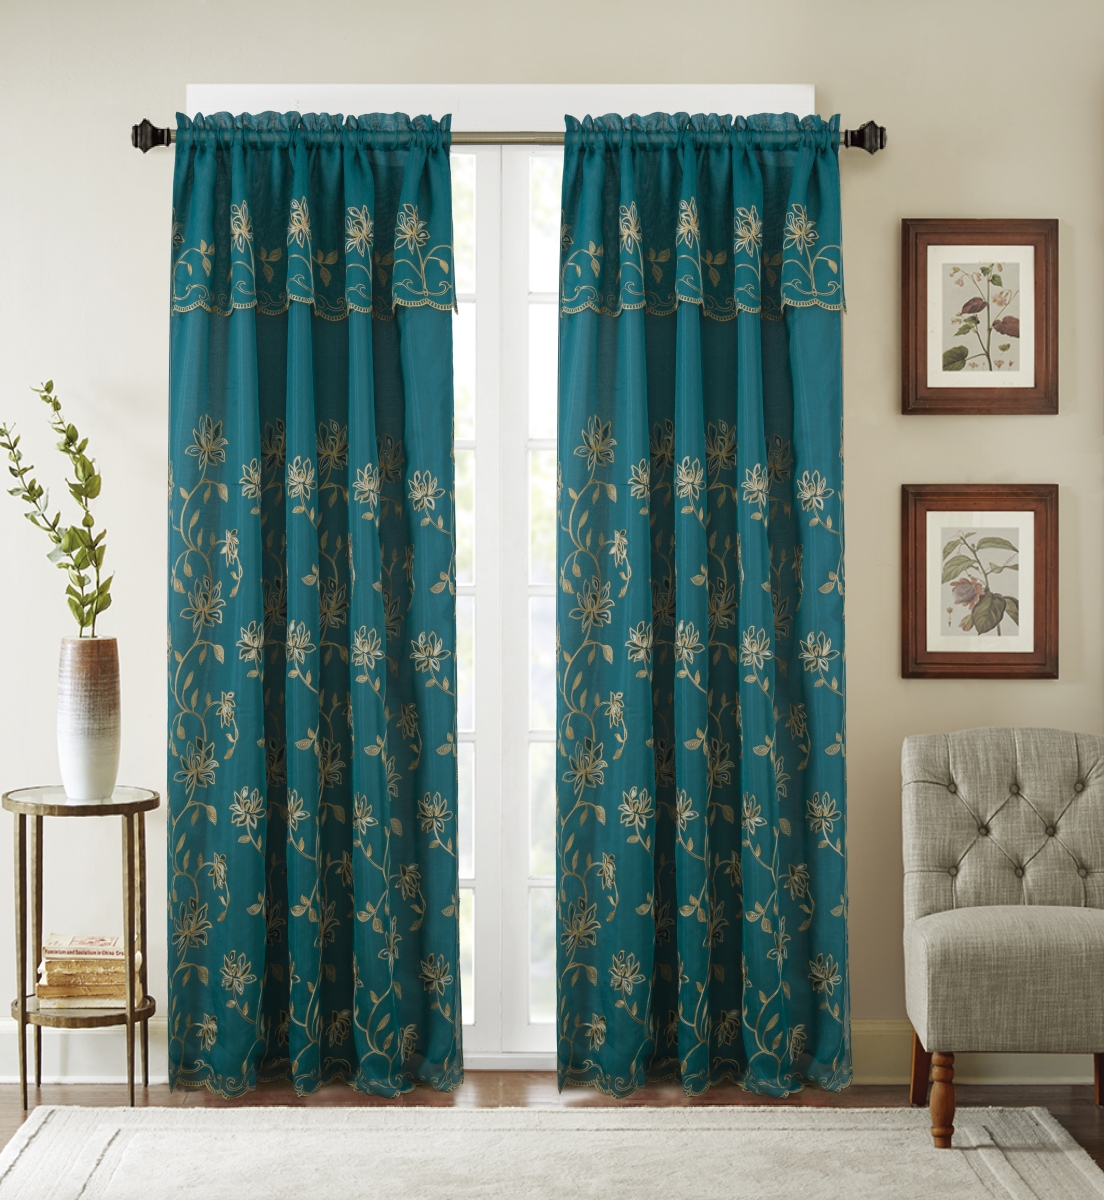 Pnd23691 54 X 84 In. Durant Floral Embroidered Single Rod Pocket Curtain Panel With Attached Valance, Teal